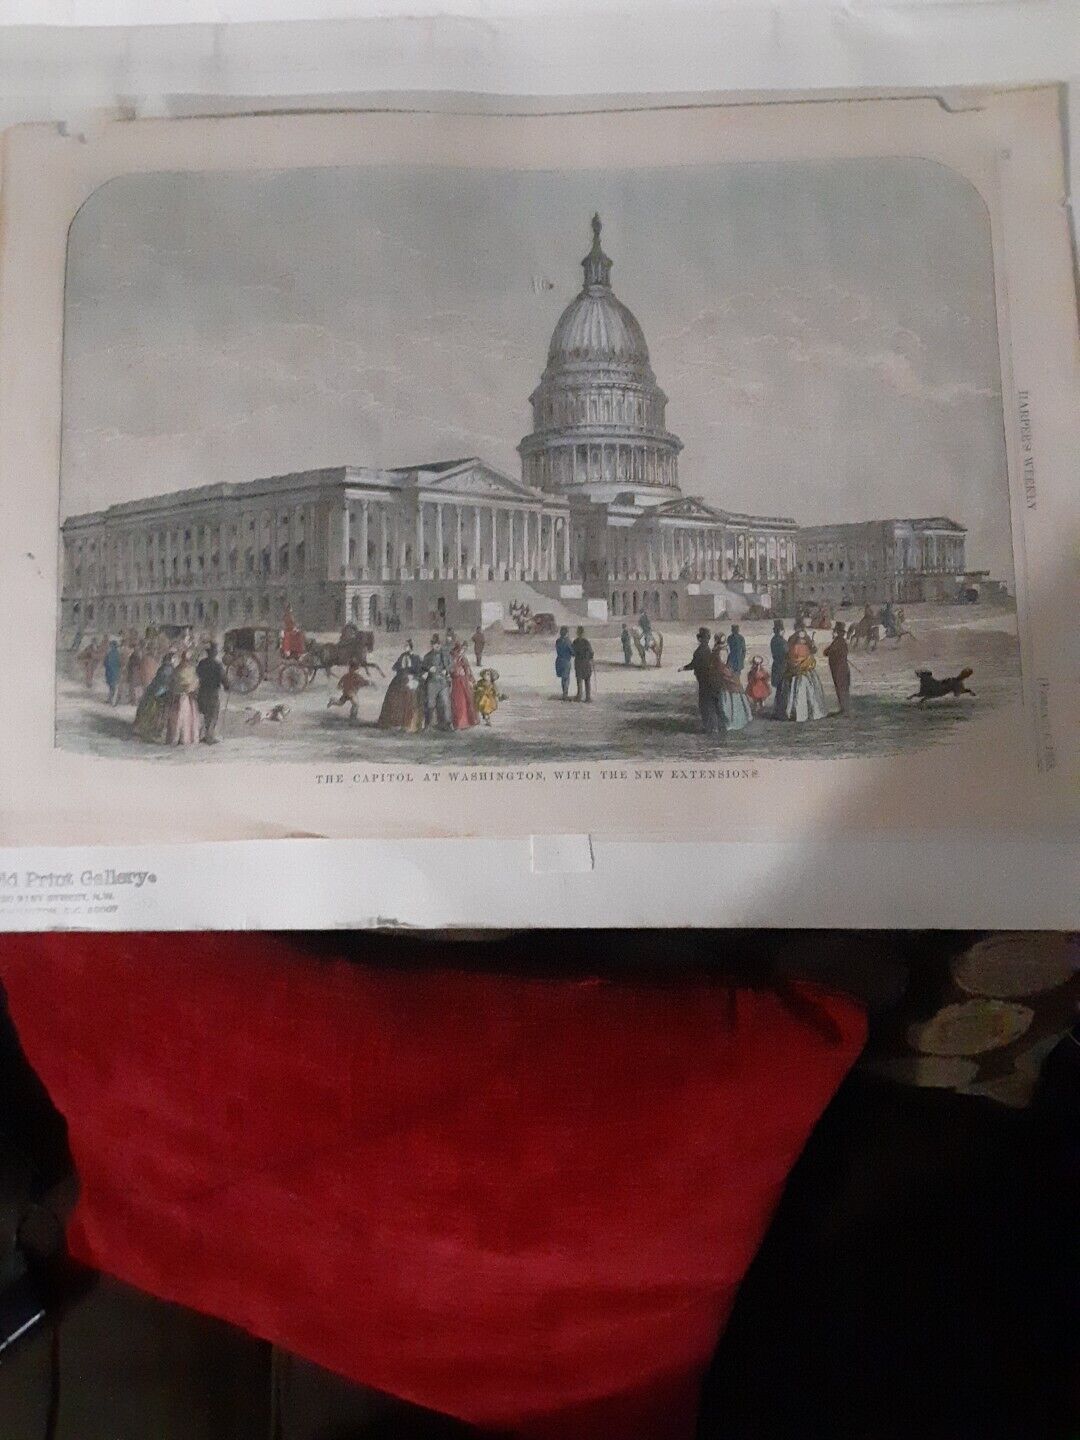 HARPERS WEEKLY FEB 6 1858 THE CAPITOL AT WASHINGTON WITH THE NEW EXTENSIONS